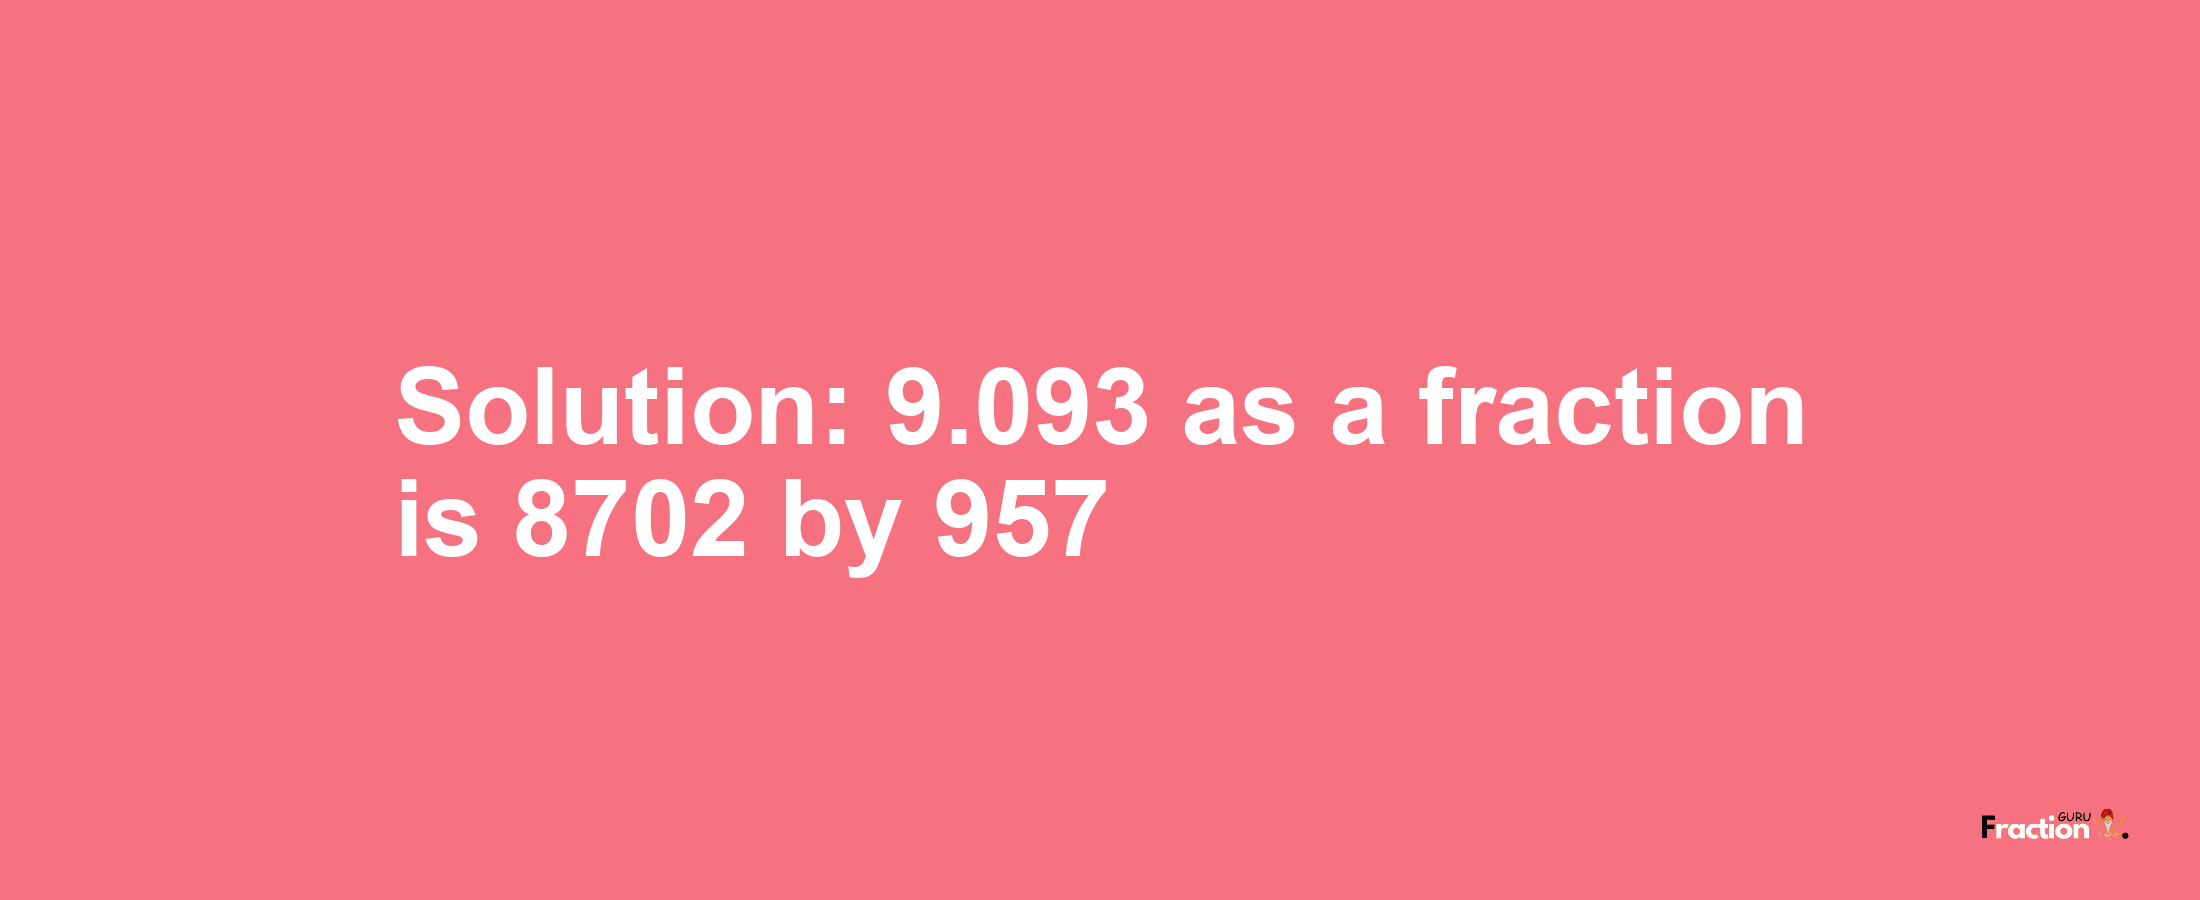 Solution:9.093 as a fraction is 8702/957